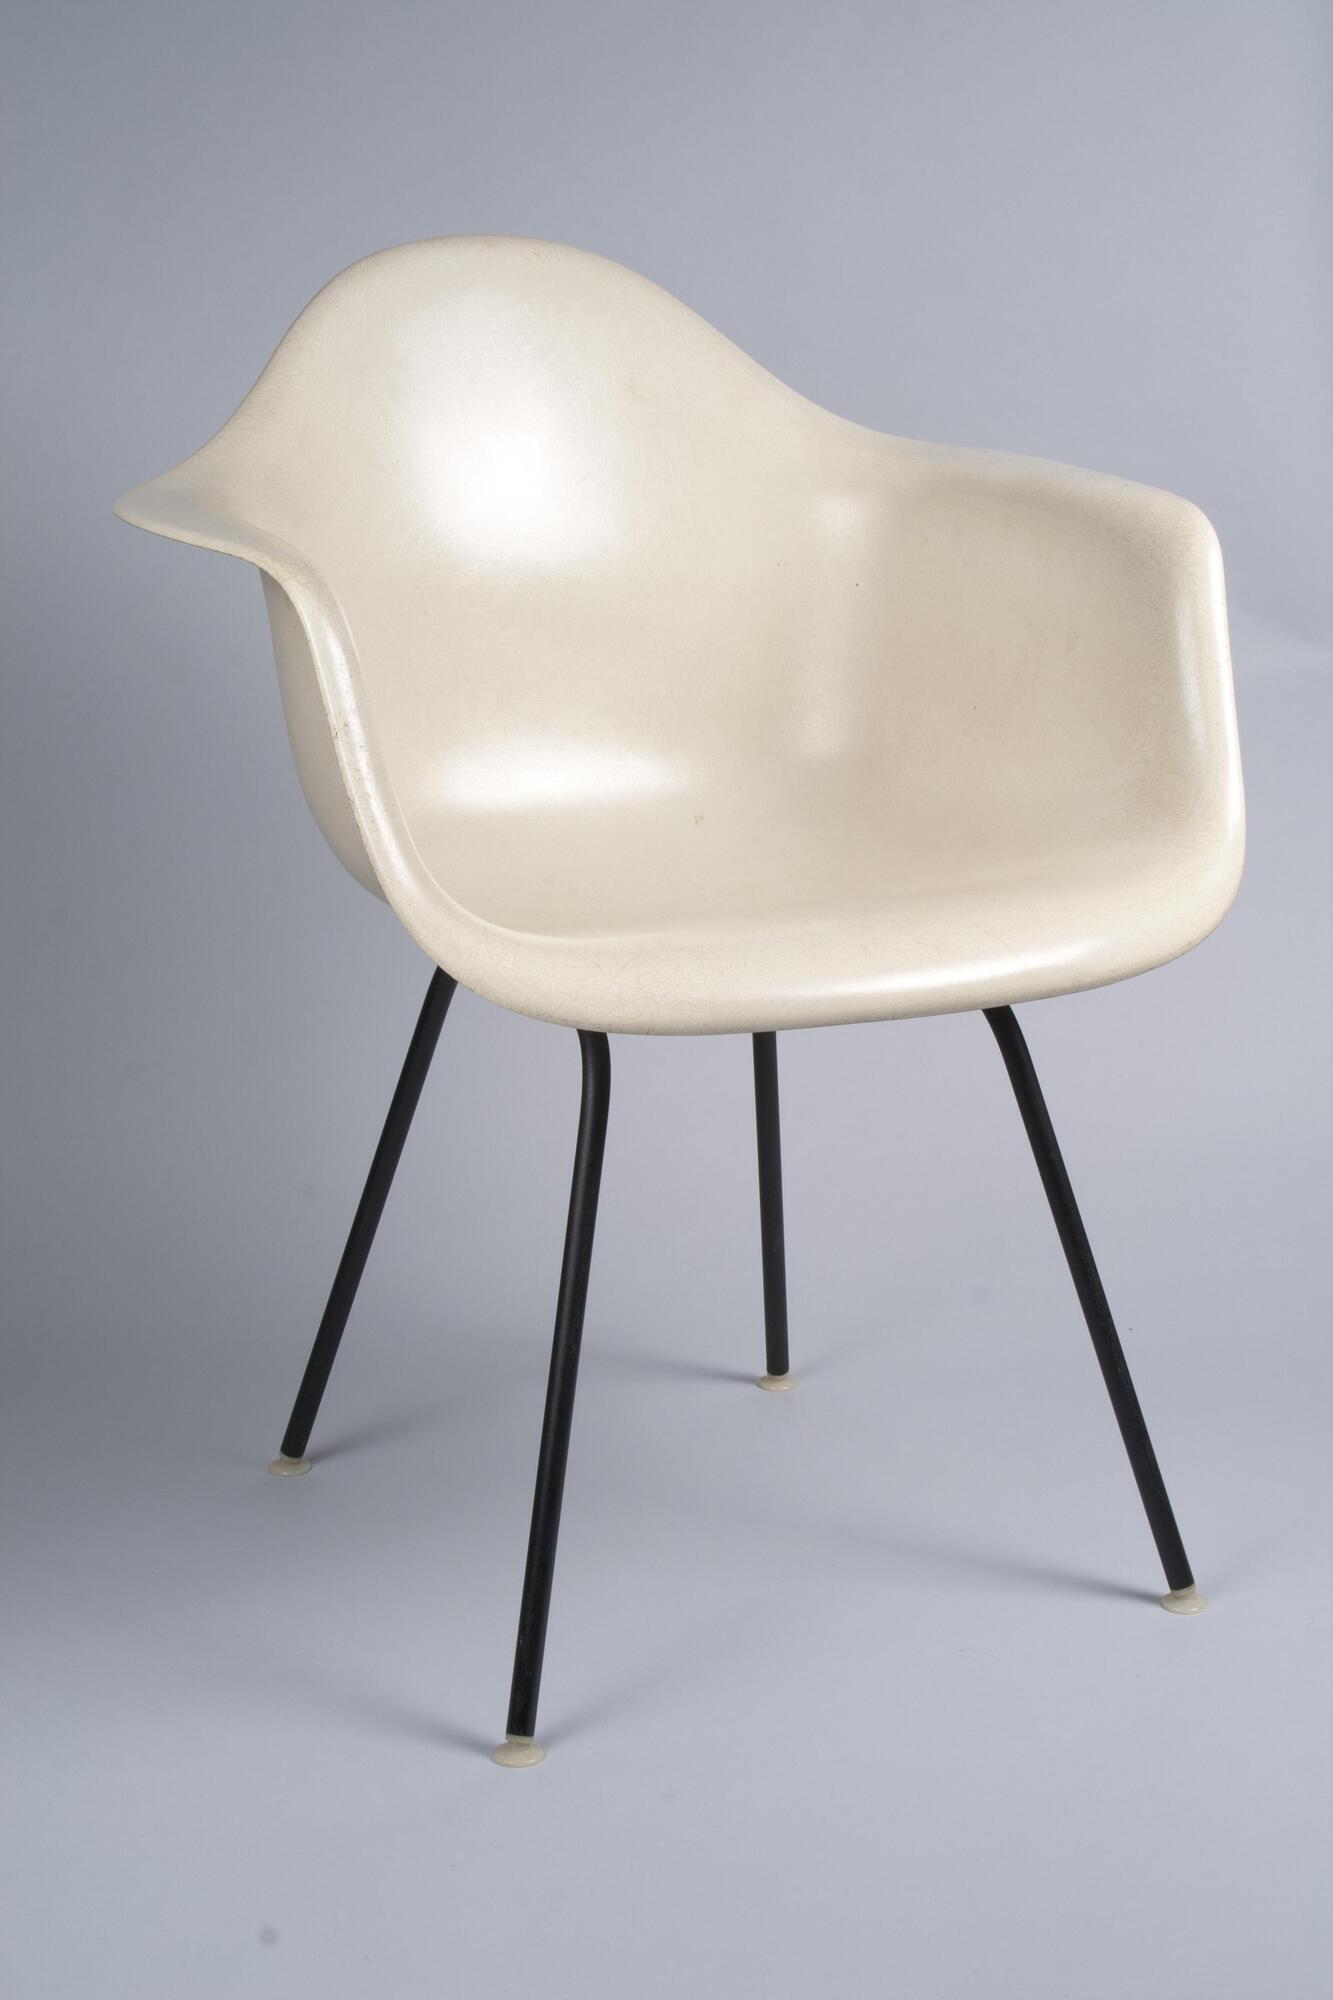 White armchair consisting of a single plastic "shell" mounted on a black, four-legged metal base (an "H" base).